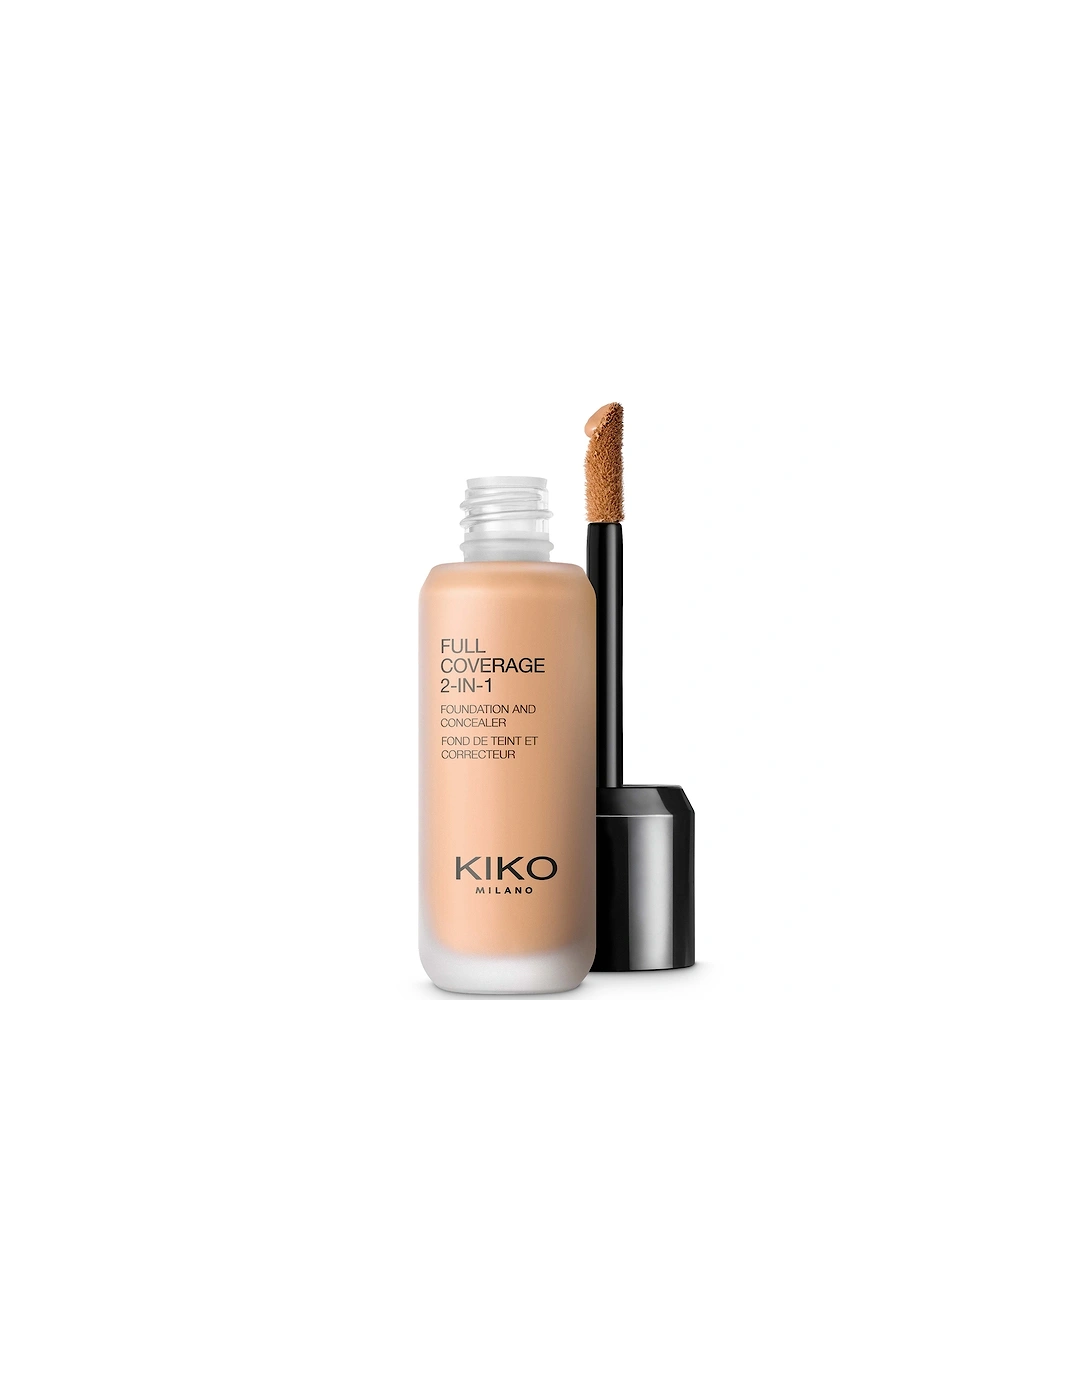 Full Coverage 2-in-1 Foundation and Concealer 25ml - 80 Neutral, 2 of 1